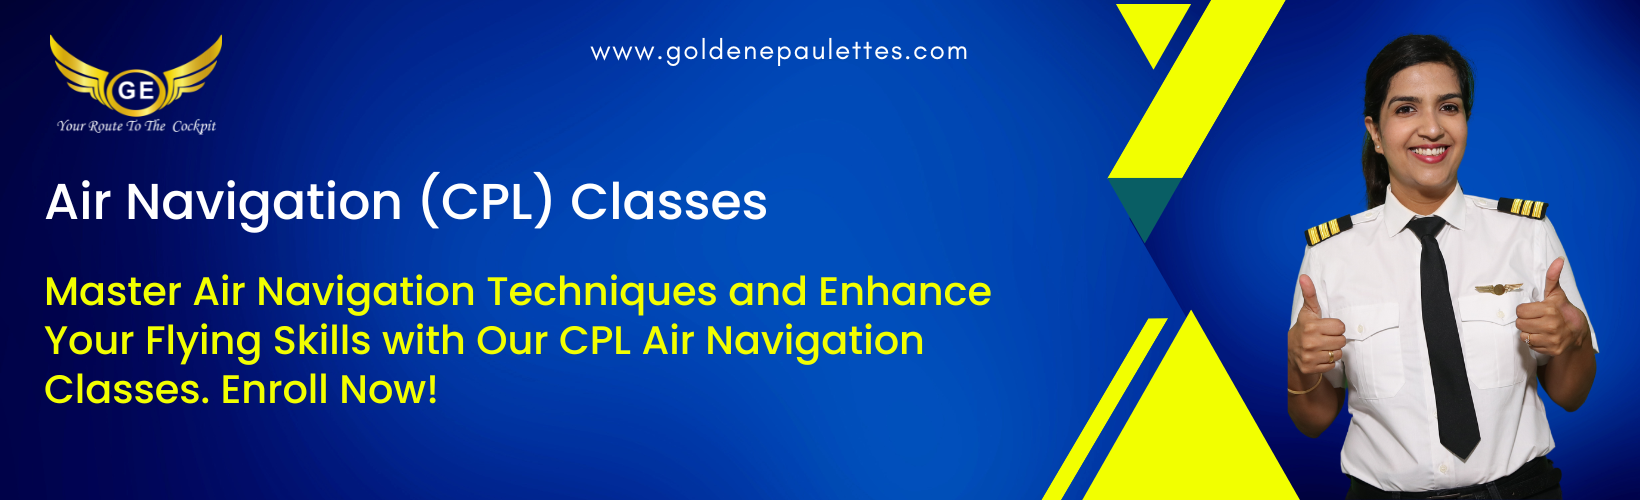 Stay Informed on New Job Openings and Airline Preparation Classes with Golden Epaulettes Aviation